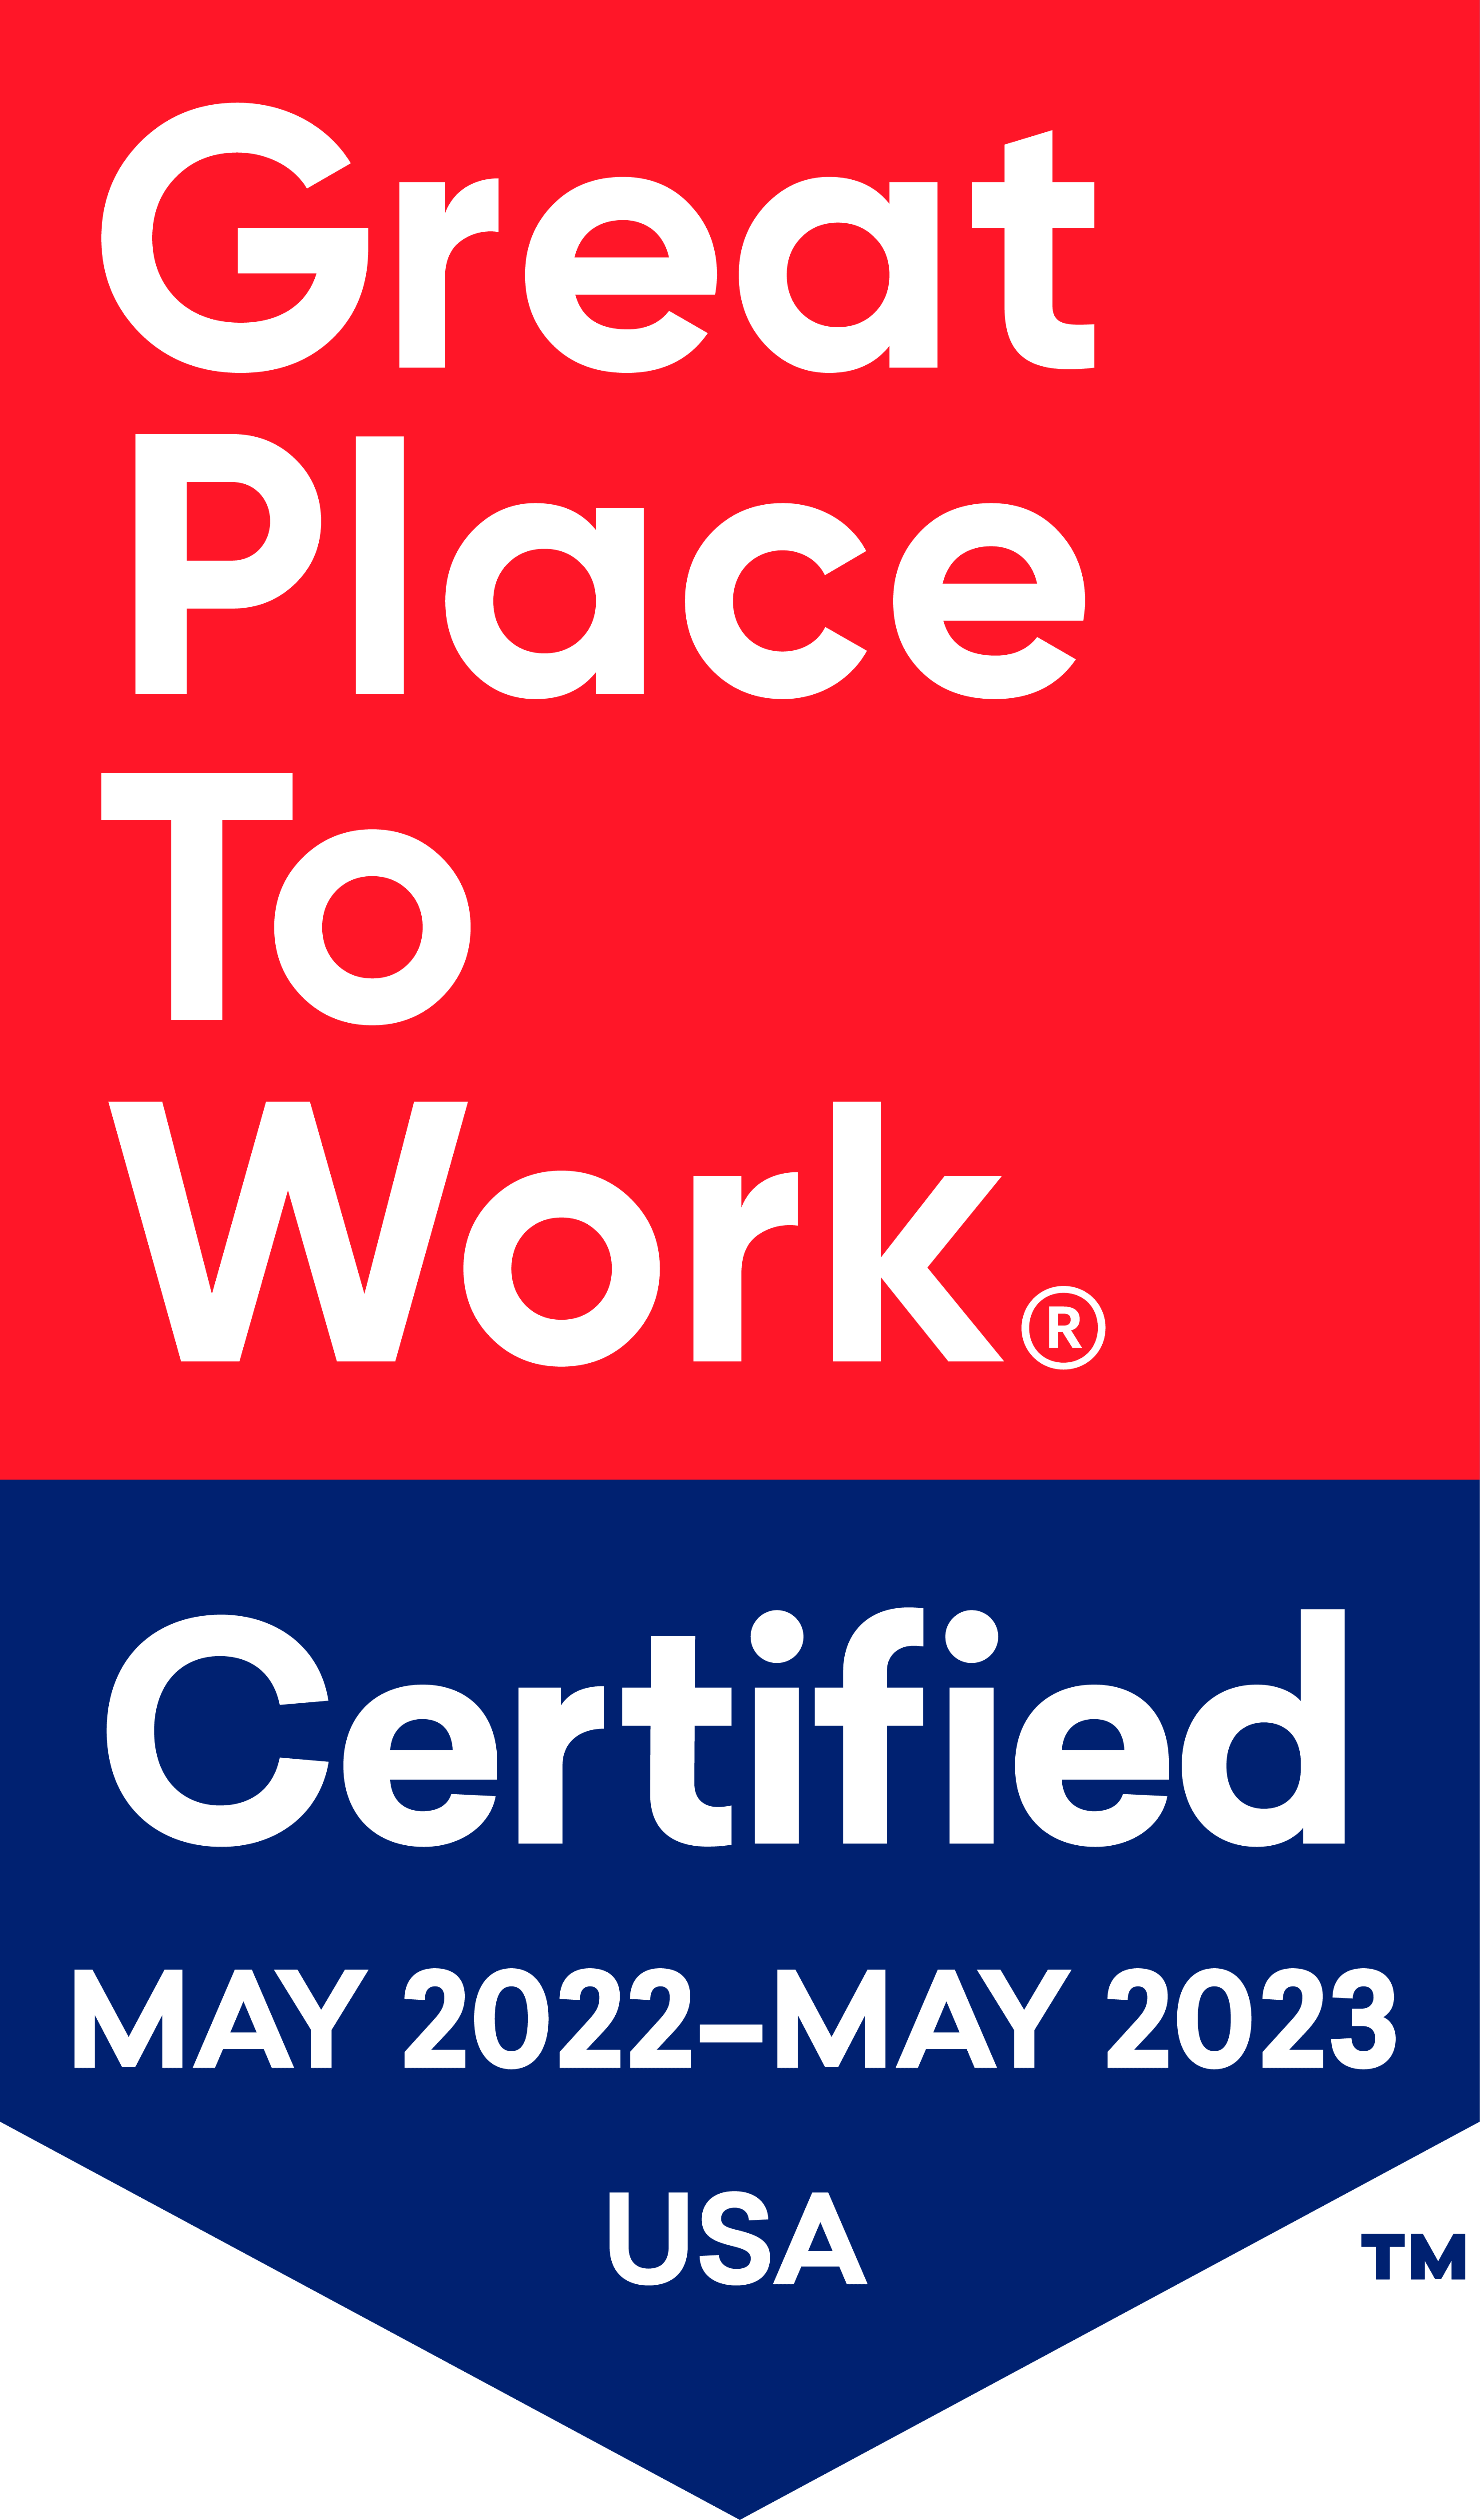 Sky Vista is Great Place To Work Certified